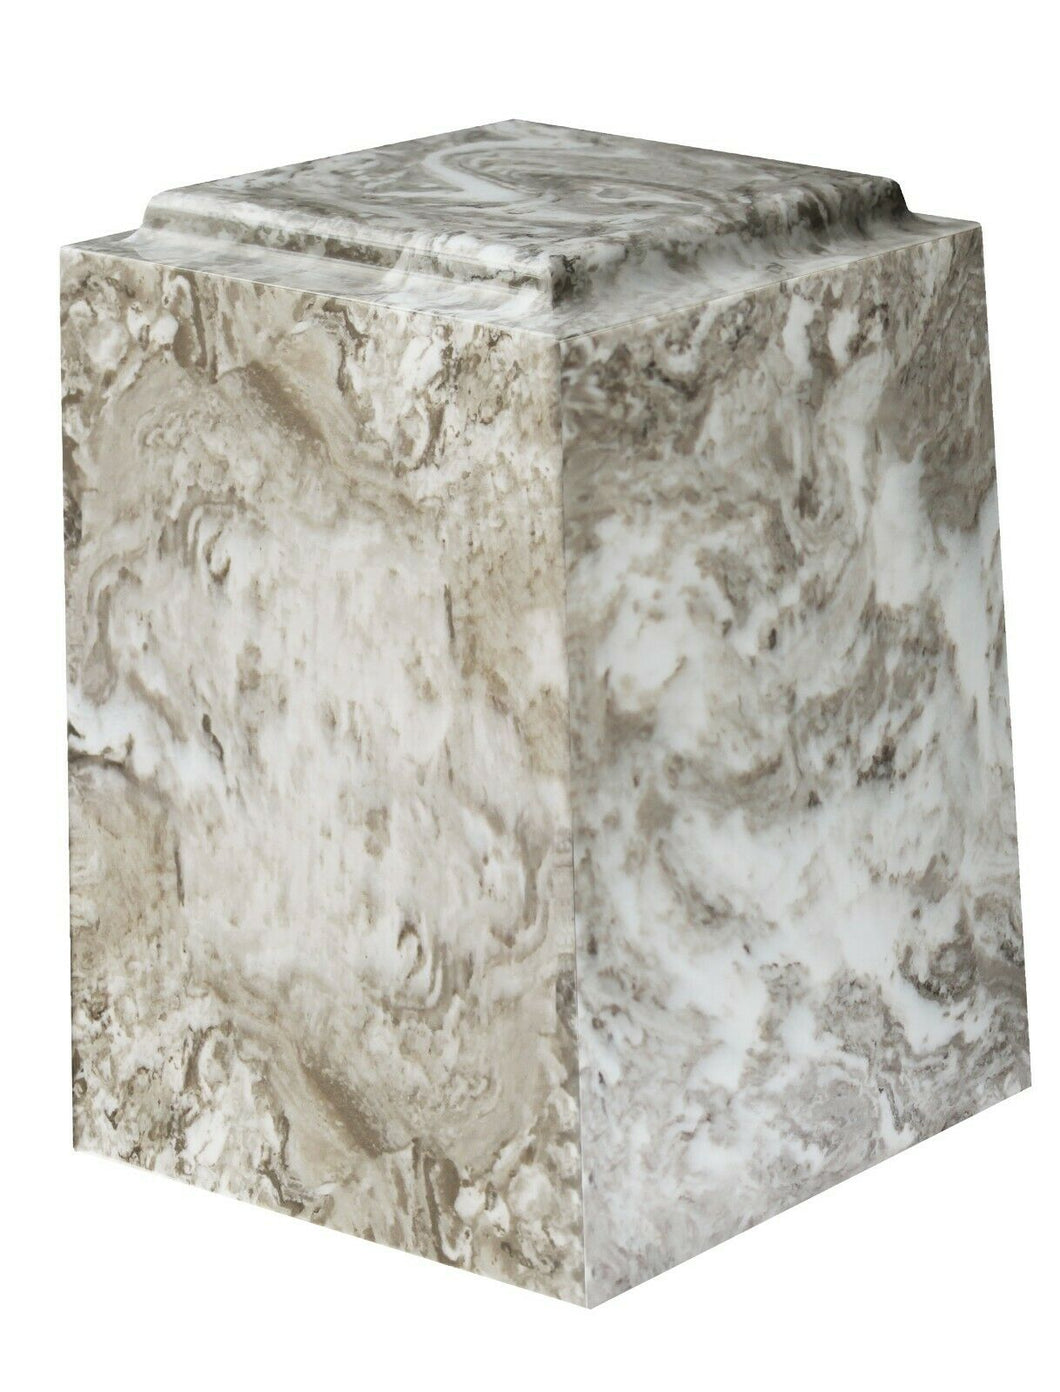 Large/Adult 220 Cubic Inch Windsor Perlato Cultured Marble Cremation Urn